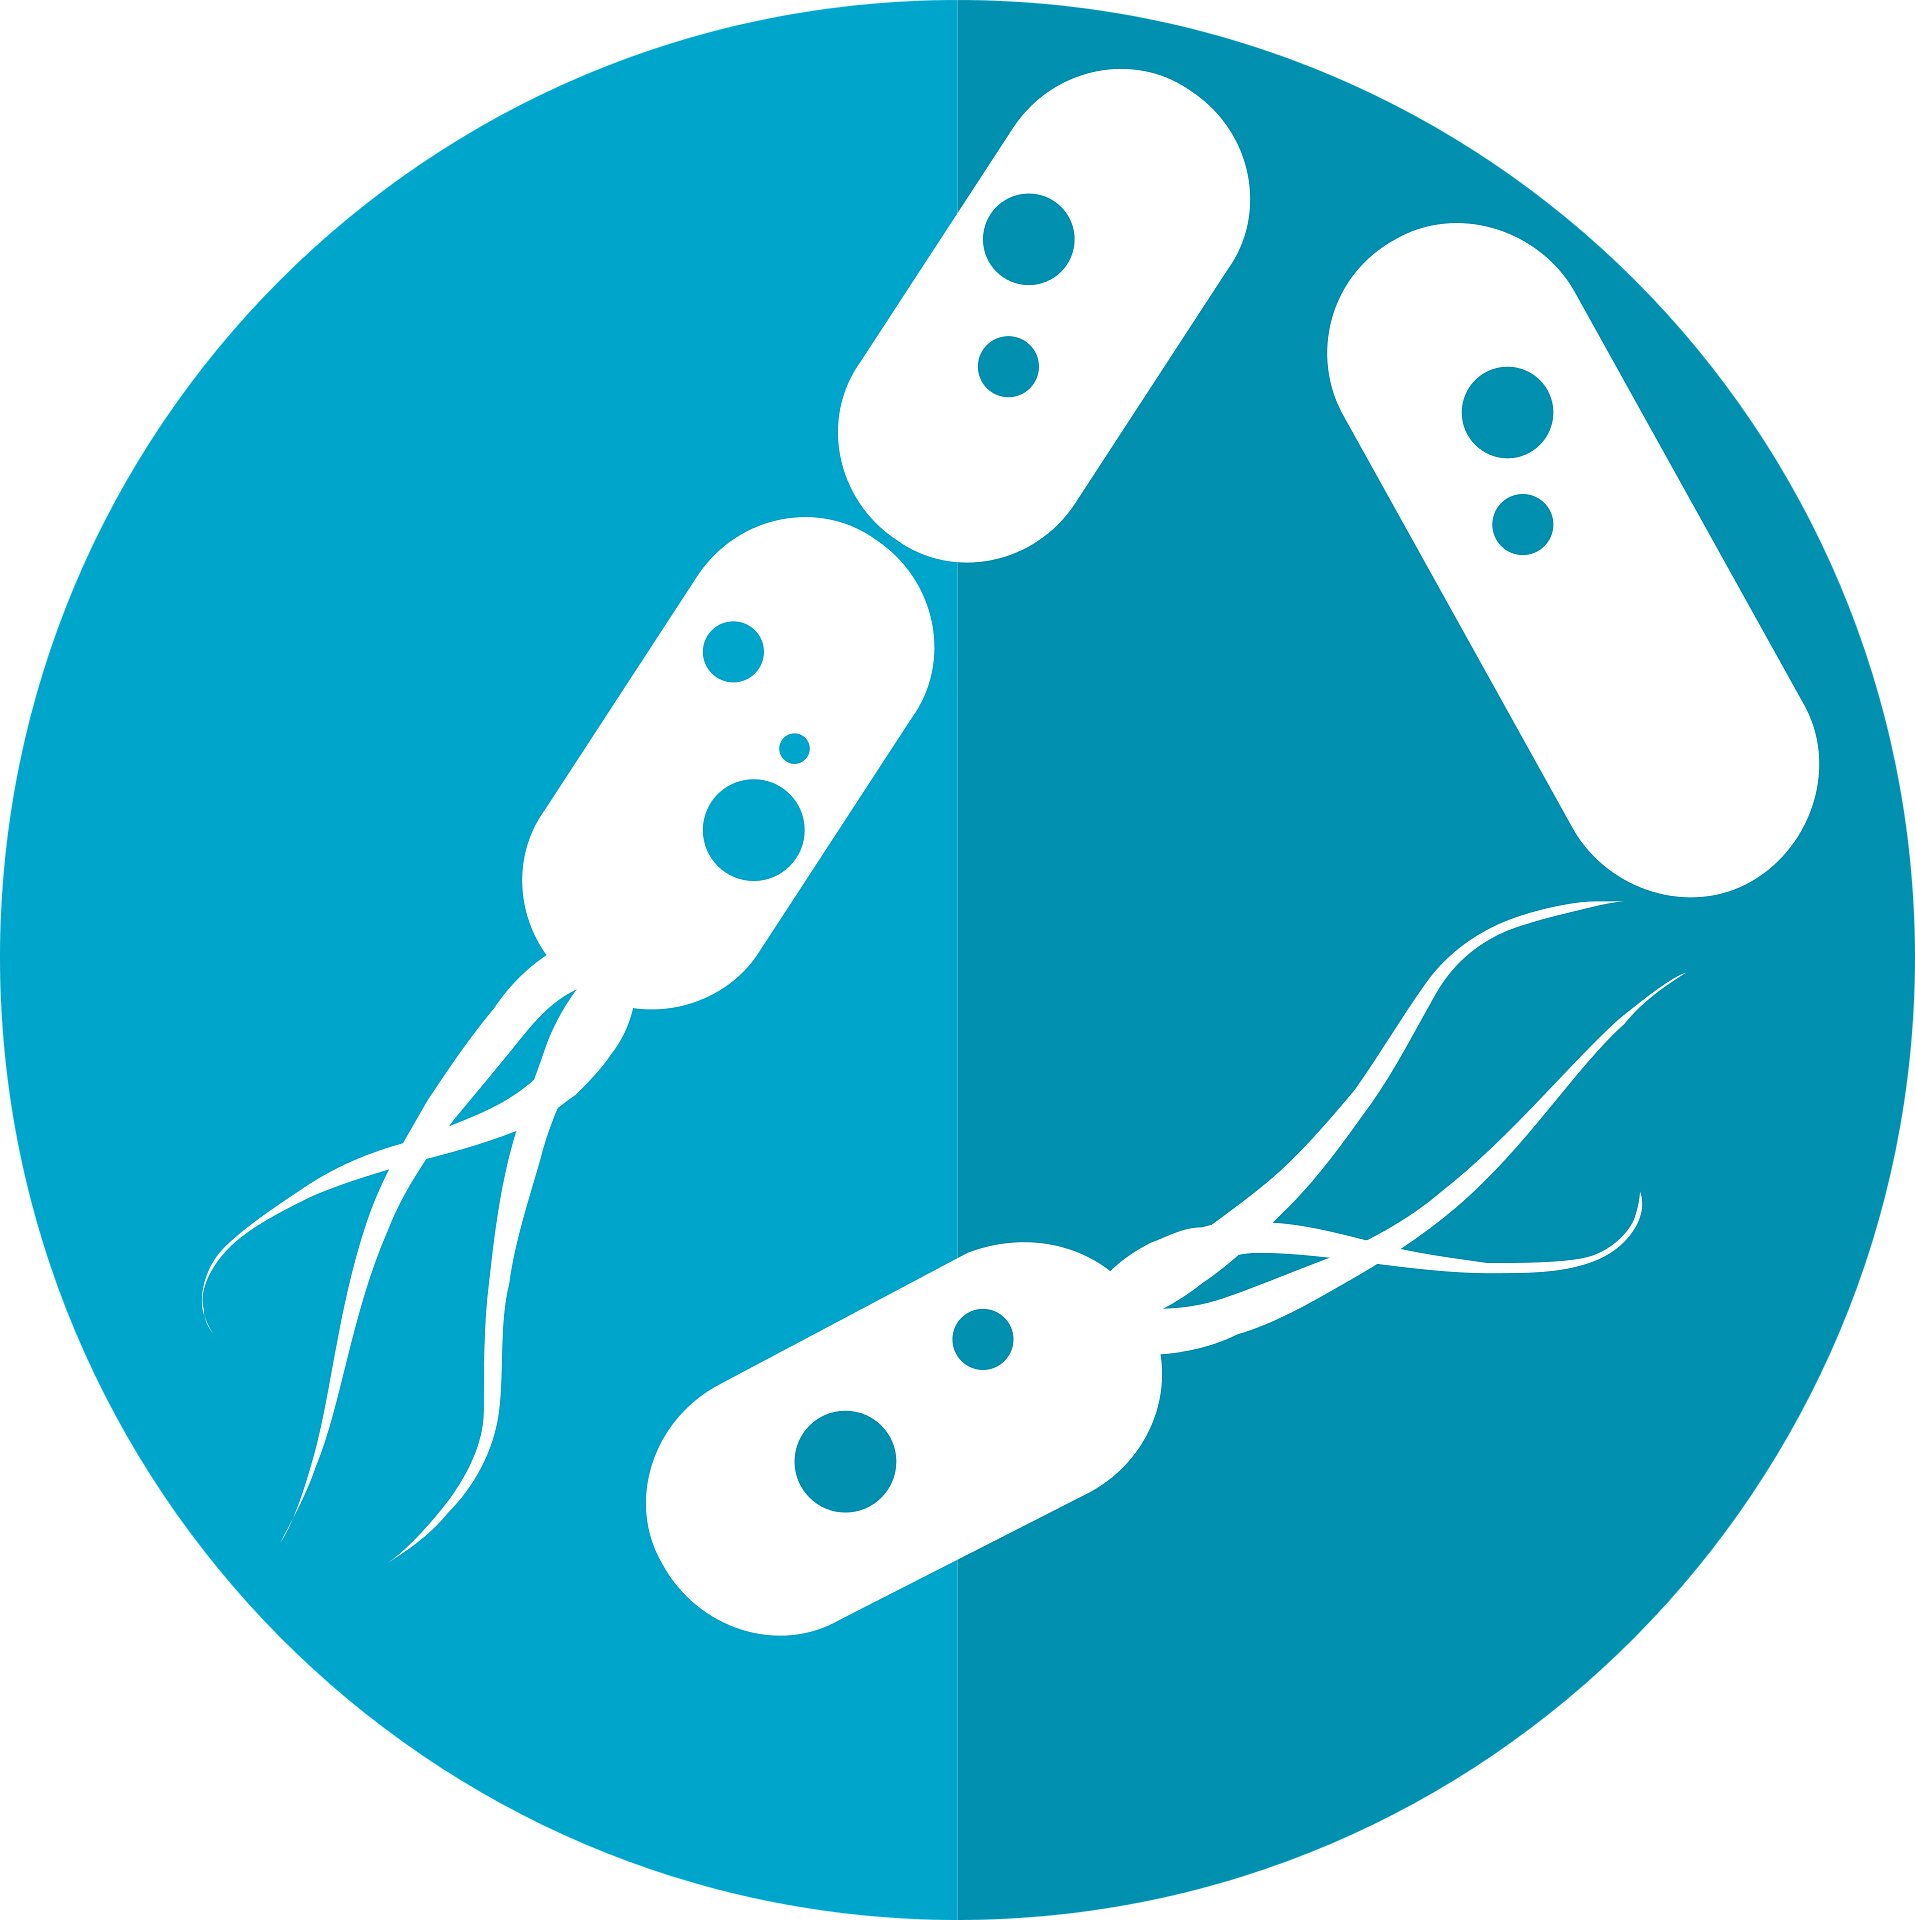 #Study finds probiotic supplement helps to form a mature microbiome in extremely preterm infants